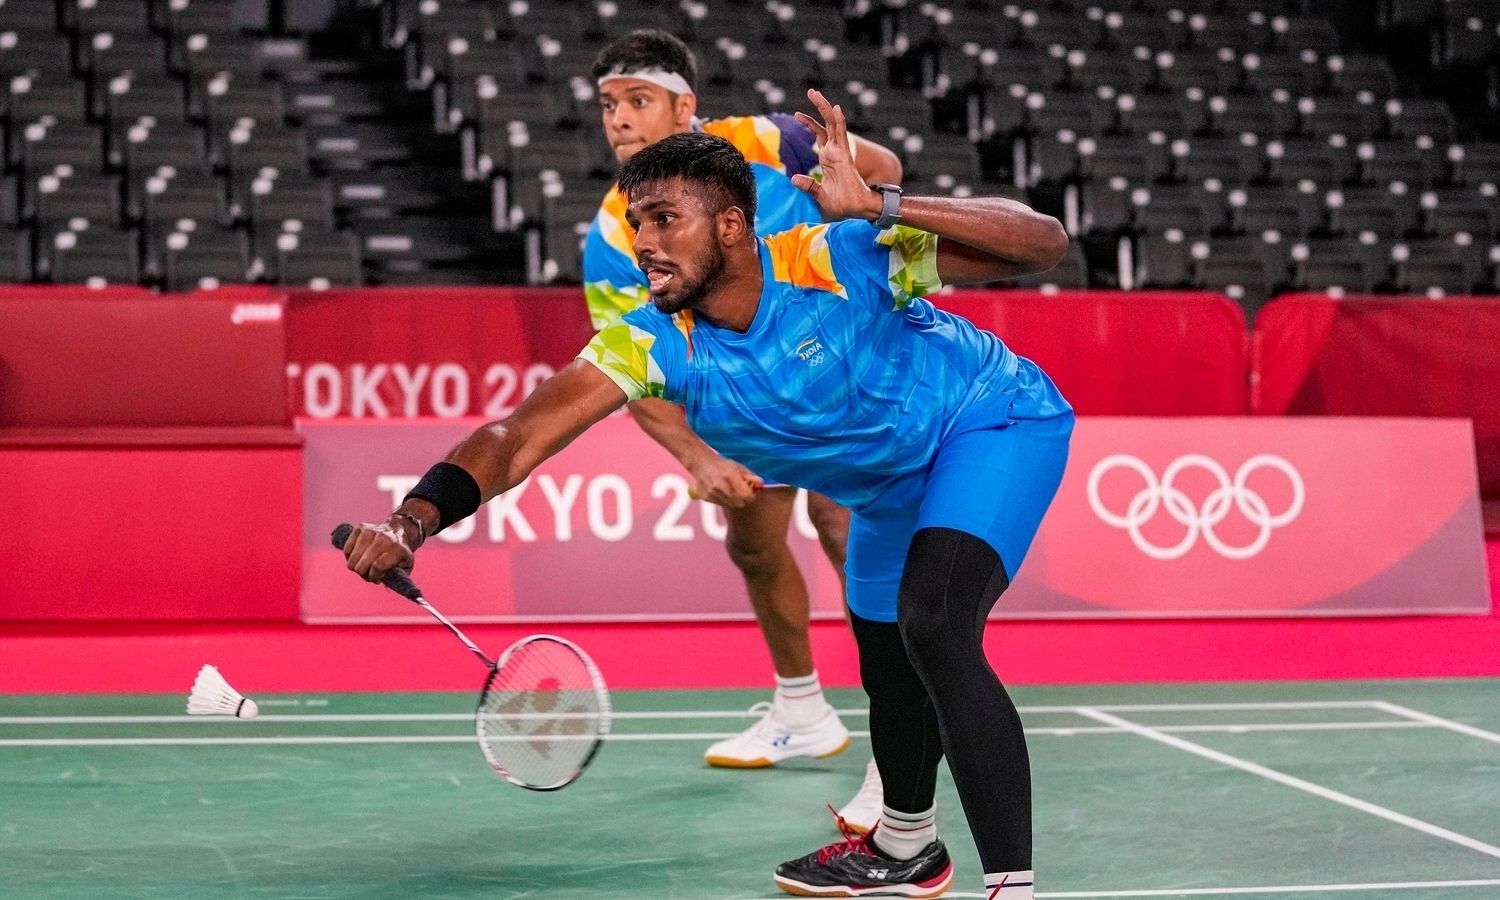 Tokyo Olympics Badminton LIVE Day 3 — Satwik/Chirag targets The Minions — Updates, scores, results, blog